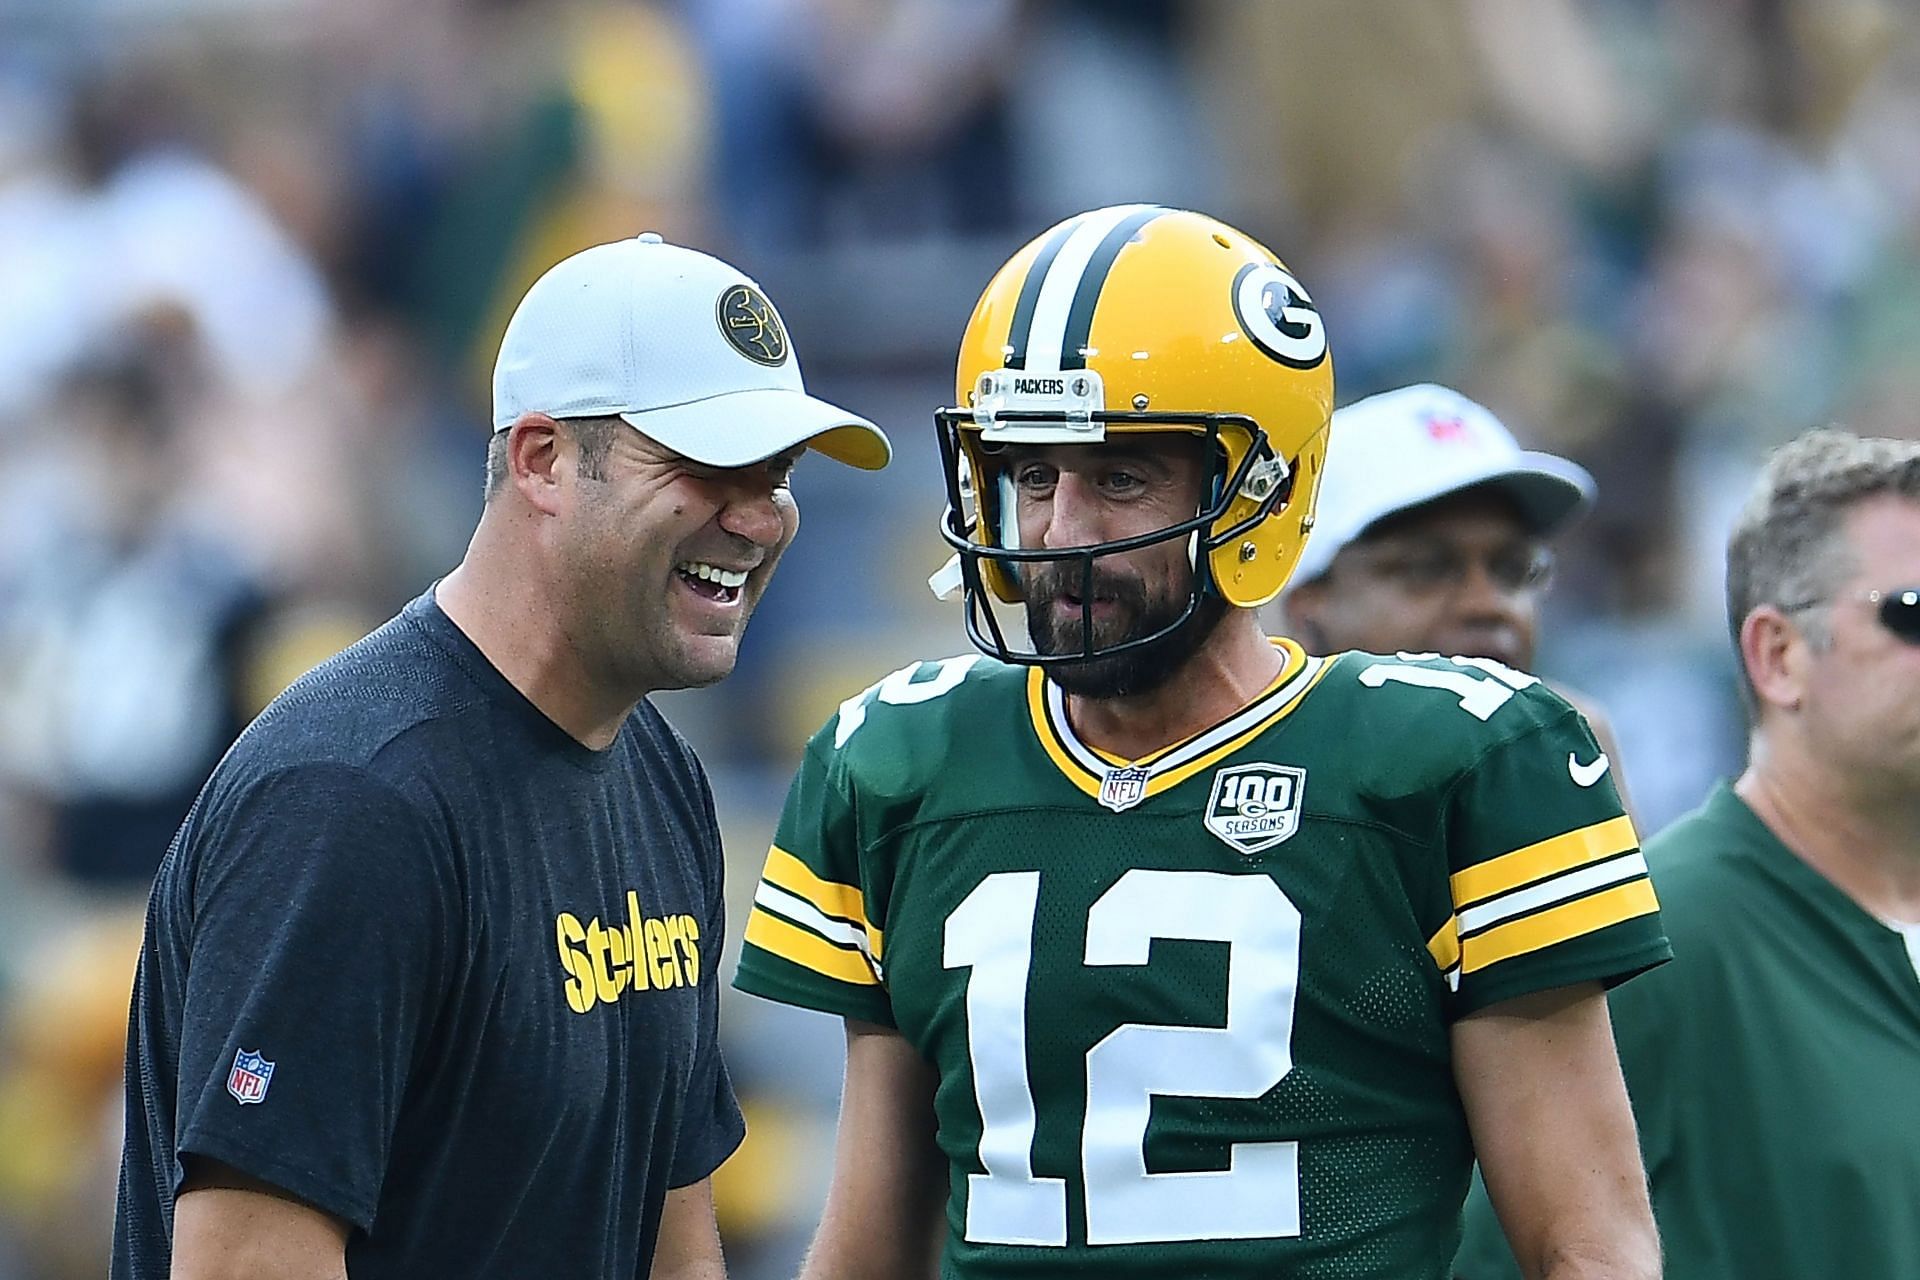 Ben Roethlisberger and Aaron Rodgers